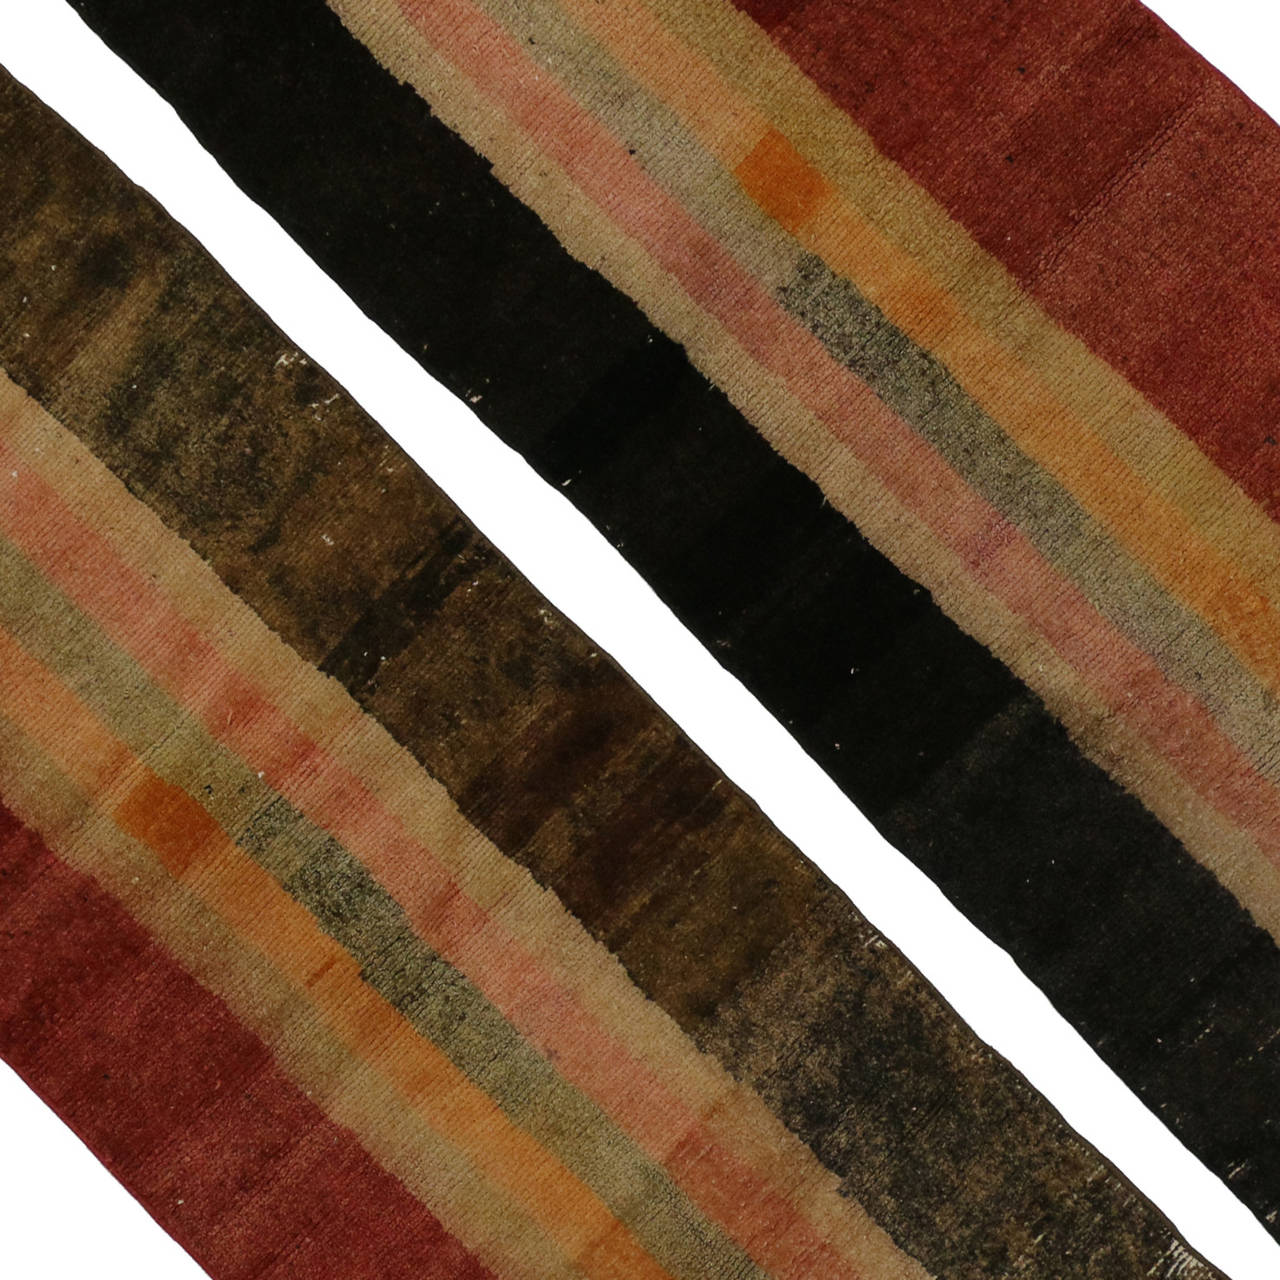 Create a comfortable and modern setting with this pair of vintage shag runners. Featuring a Mad Men color palette, these earthy shades of brown, orange, brick red and black are excellent color combinations for making an interior space feel both